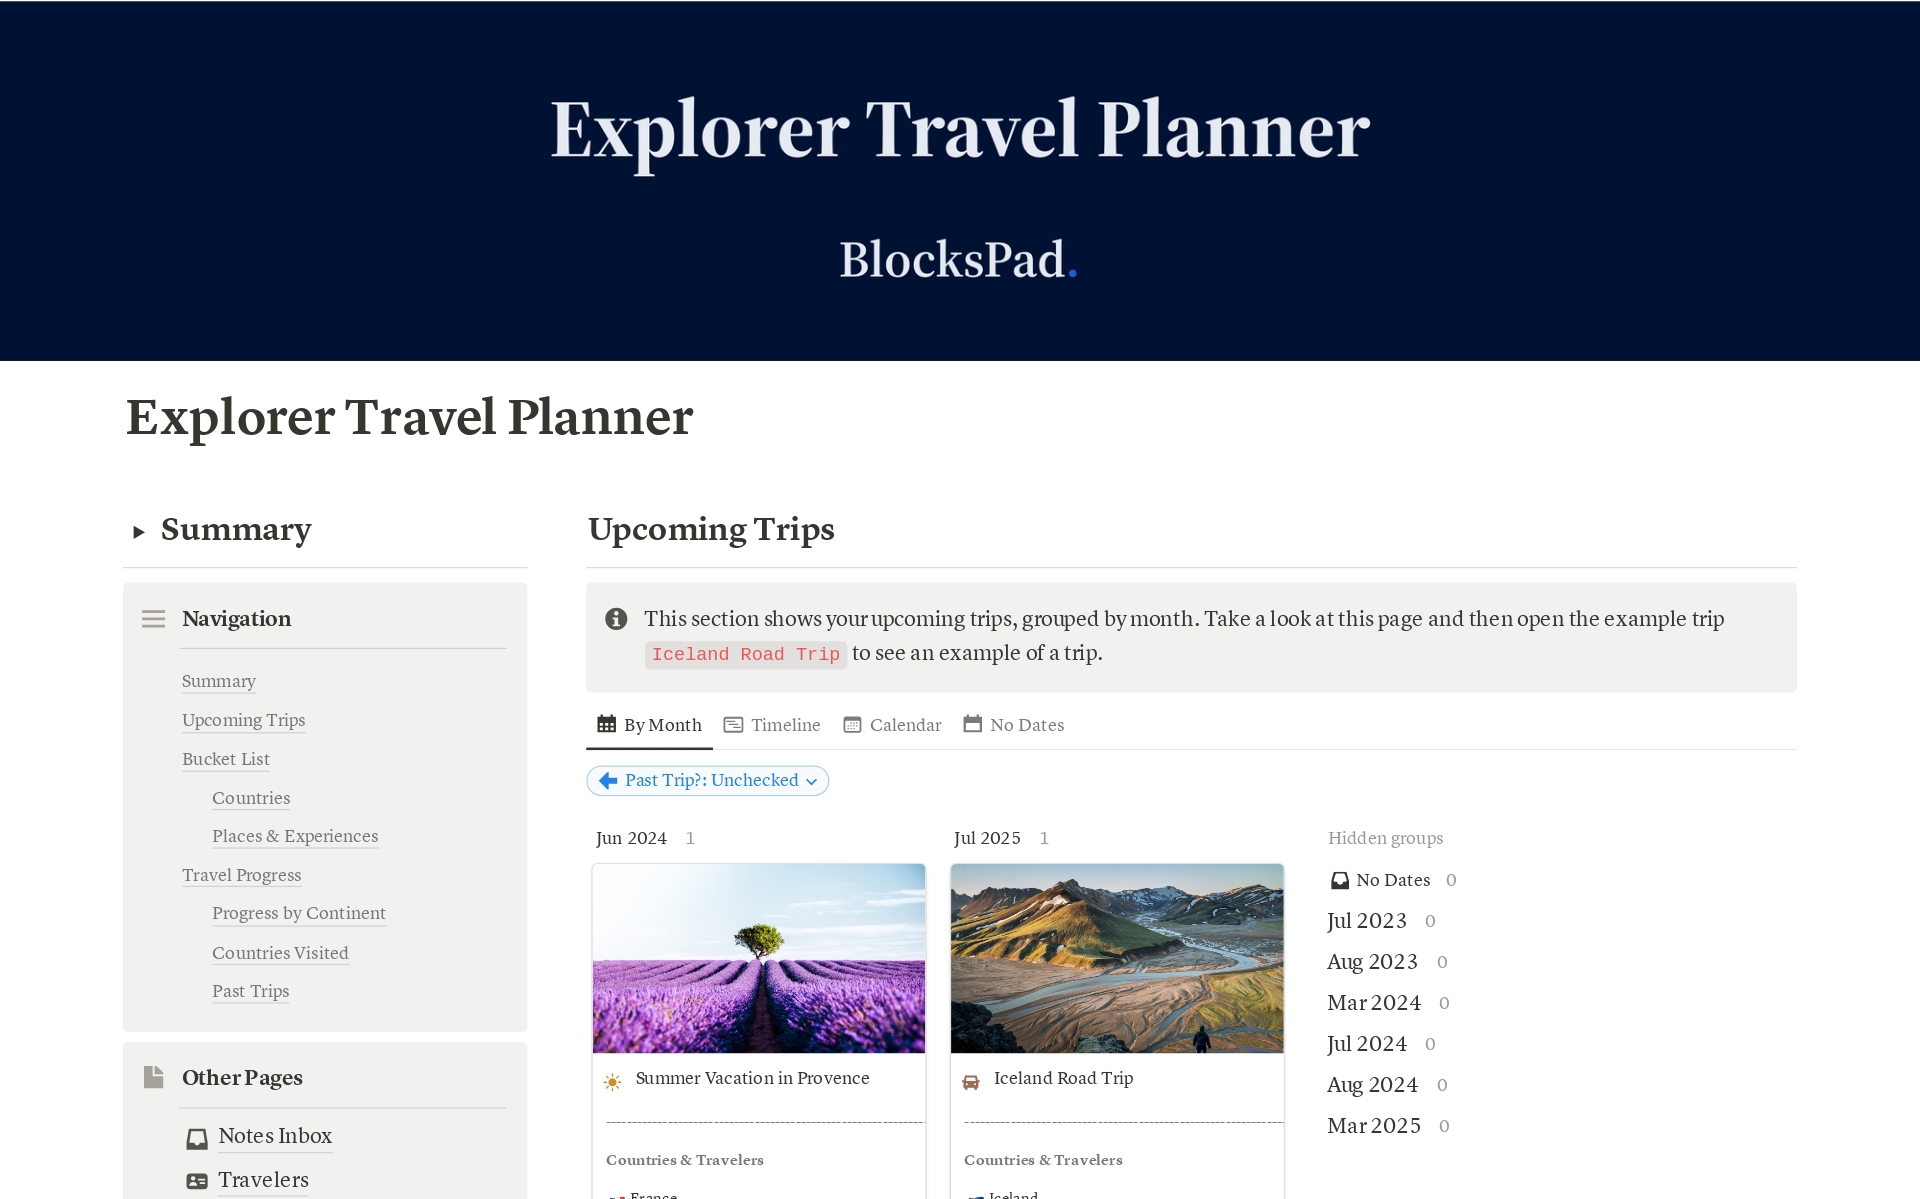 Plan your next trips with the Explorer Travel Planner and make your travel dreams a reality. The templates includes 196 countries with all their essential details.